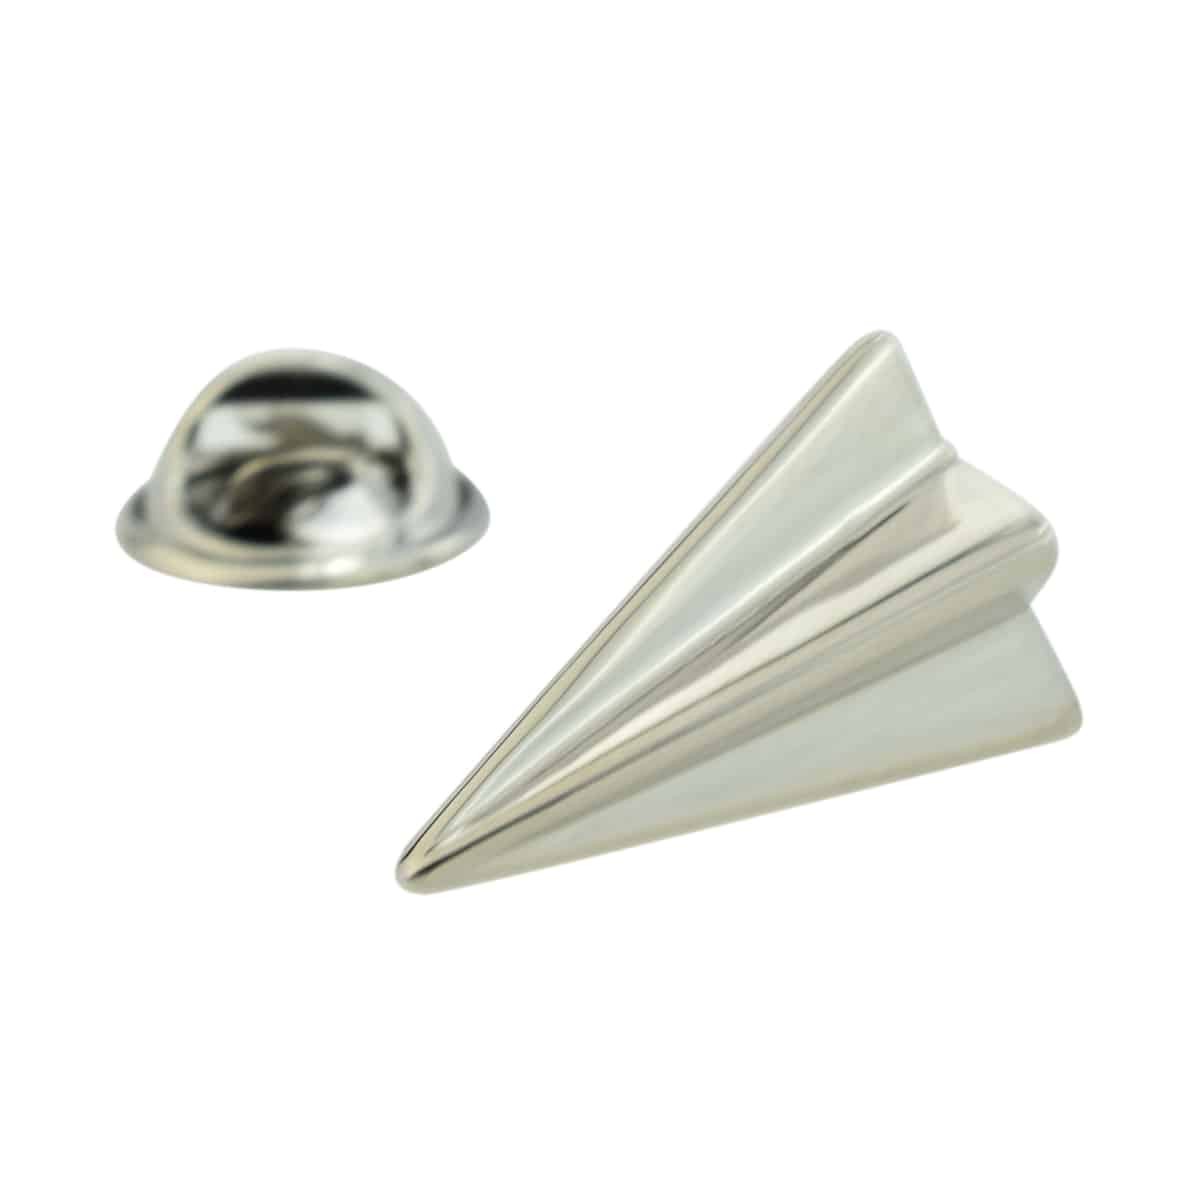 Silver Plate Paper Plane Pin, Silver Plate Paper Airplane Pin